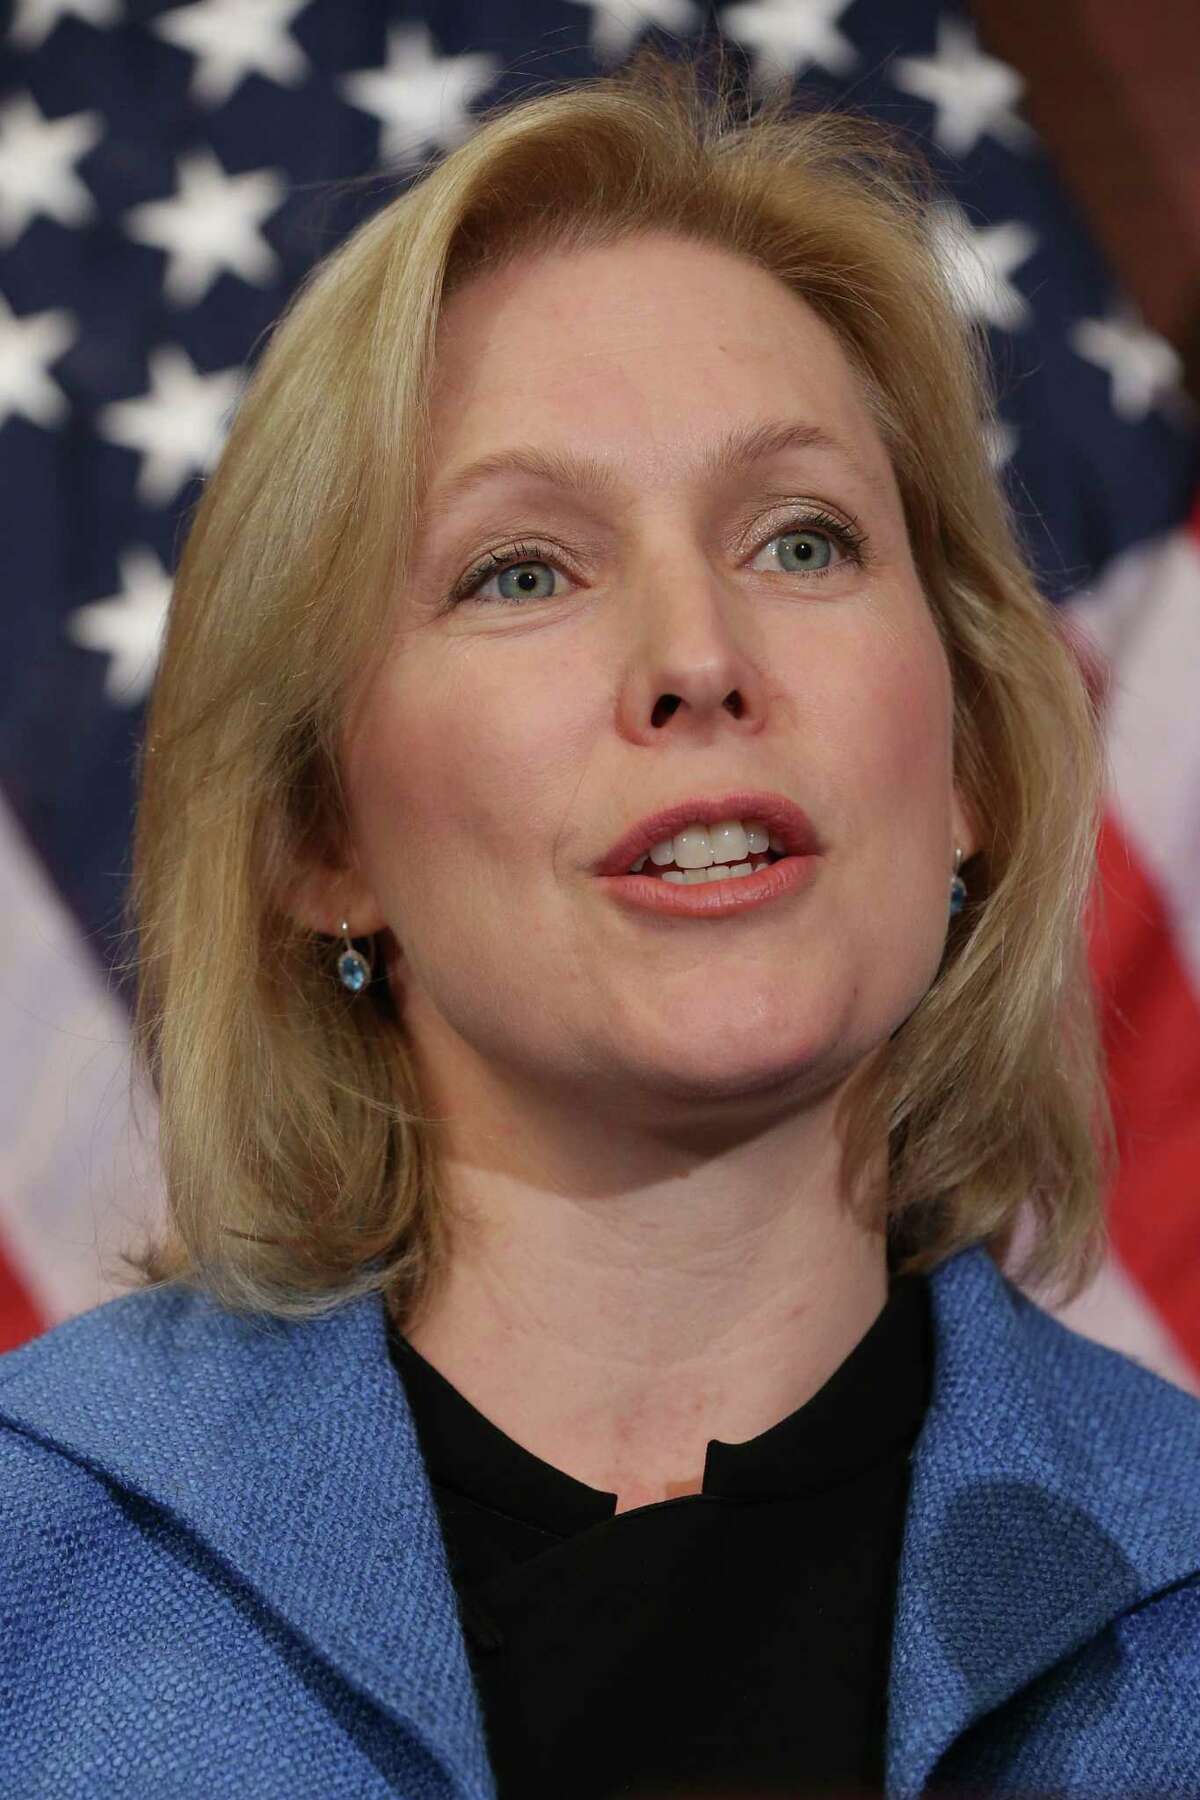 WASHINGTON, DC - JULY 30: Sen. Kristen Gillibrand (D-NY) participates in a news conference about new legislation aimed at curbing sexual assults on college and university campuses at the U.S. Capitol Visitors Center July 30, 2014 in Washington, DC. With strong bipartisan support in the Senate, the bill would require schools to make public the result of anonymous surveys about campus assaults and impose significant financial burdens on universities that fail to comply with some of the law's requirements. (Photo by Chip Somodevilla/Getty Images)